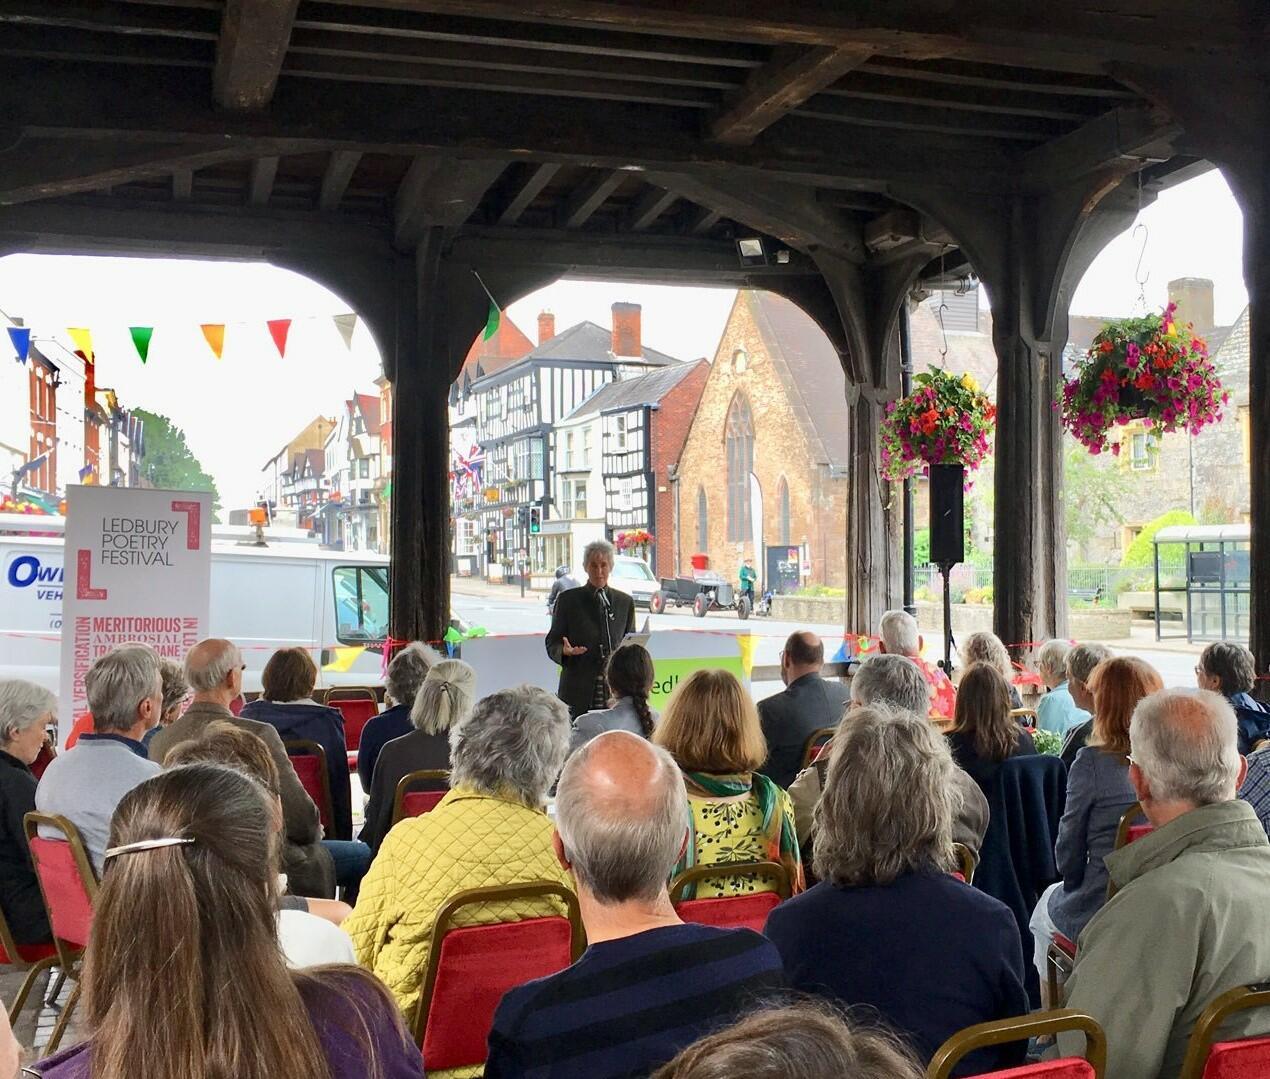 The Poetry Breakfast Under the Market house